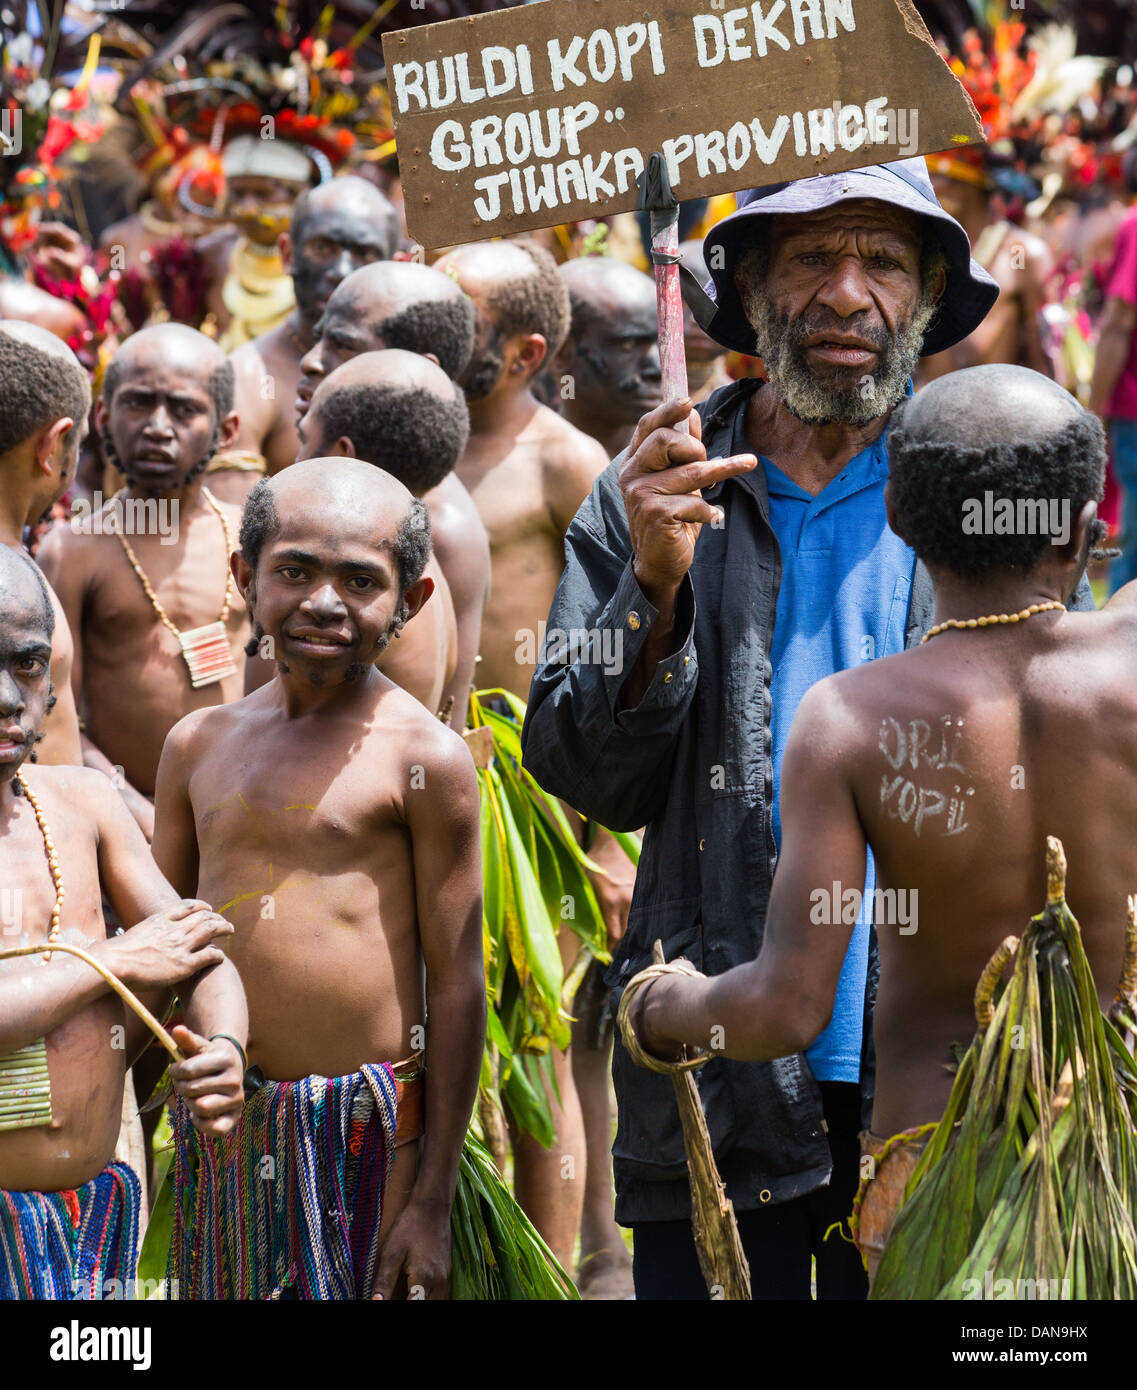 Young boys with shaved heads from the Ruldi Kopi Dekan tribe in the Jiwaka Province at the Goroka Festival, Papua New Guinea Stock Photo